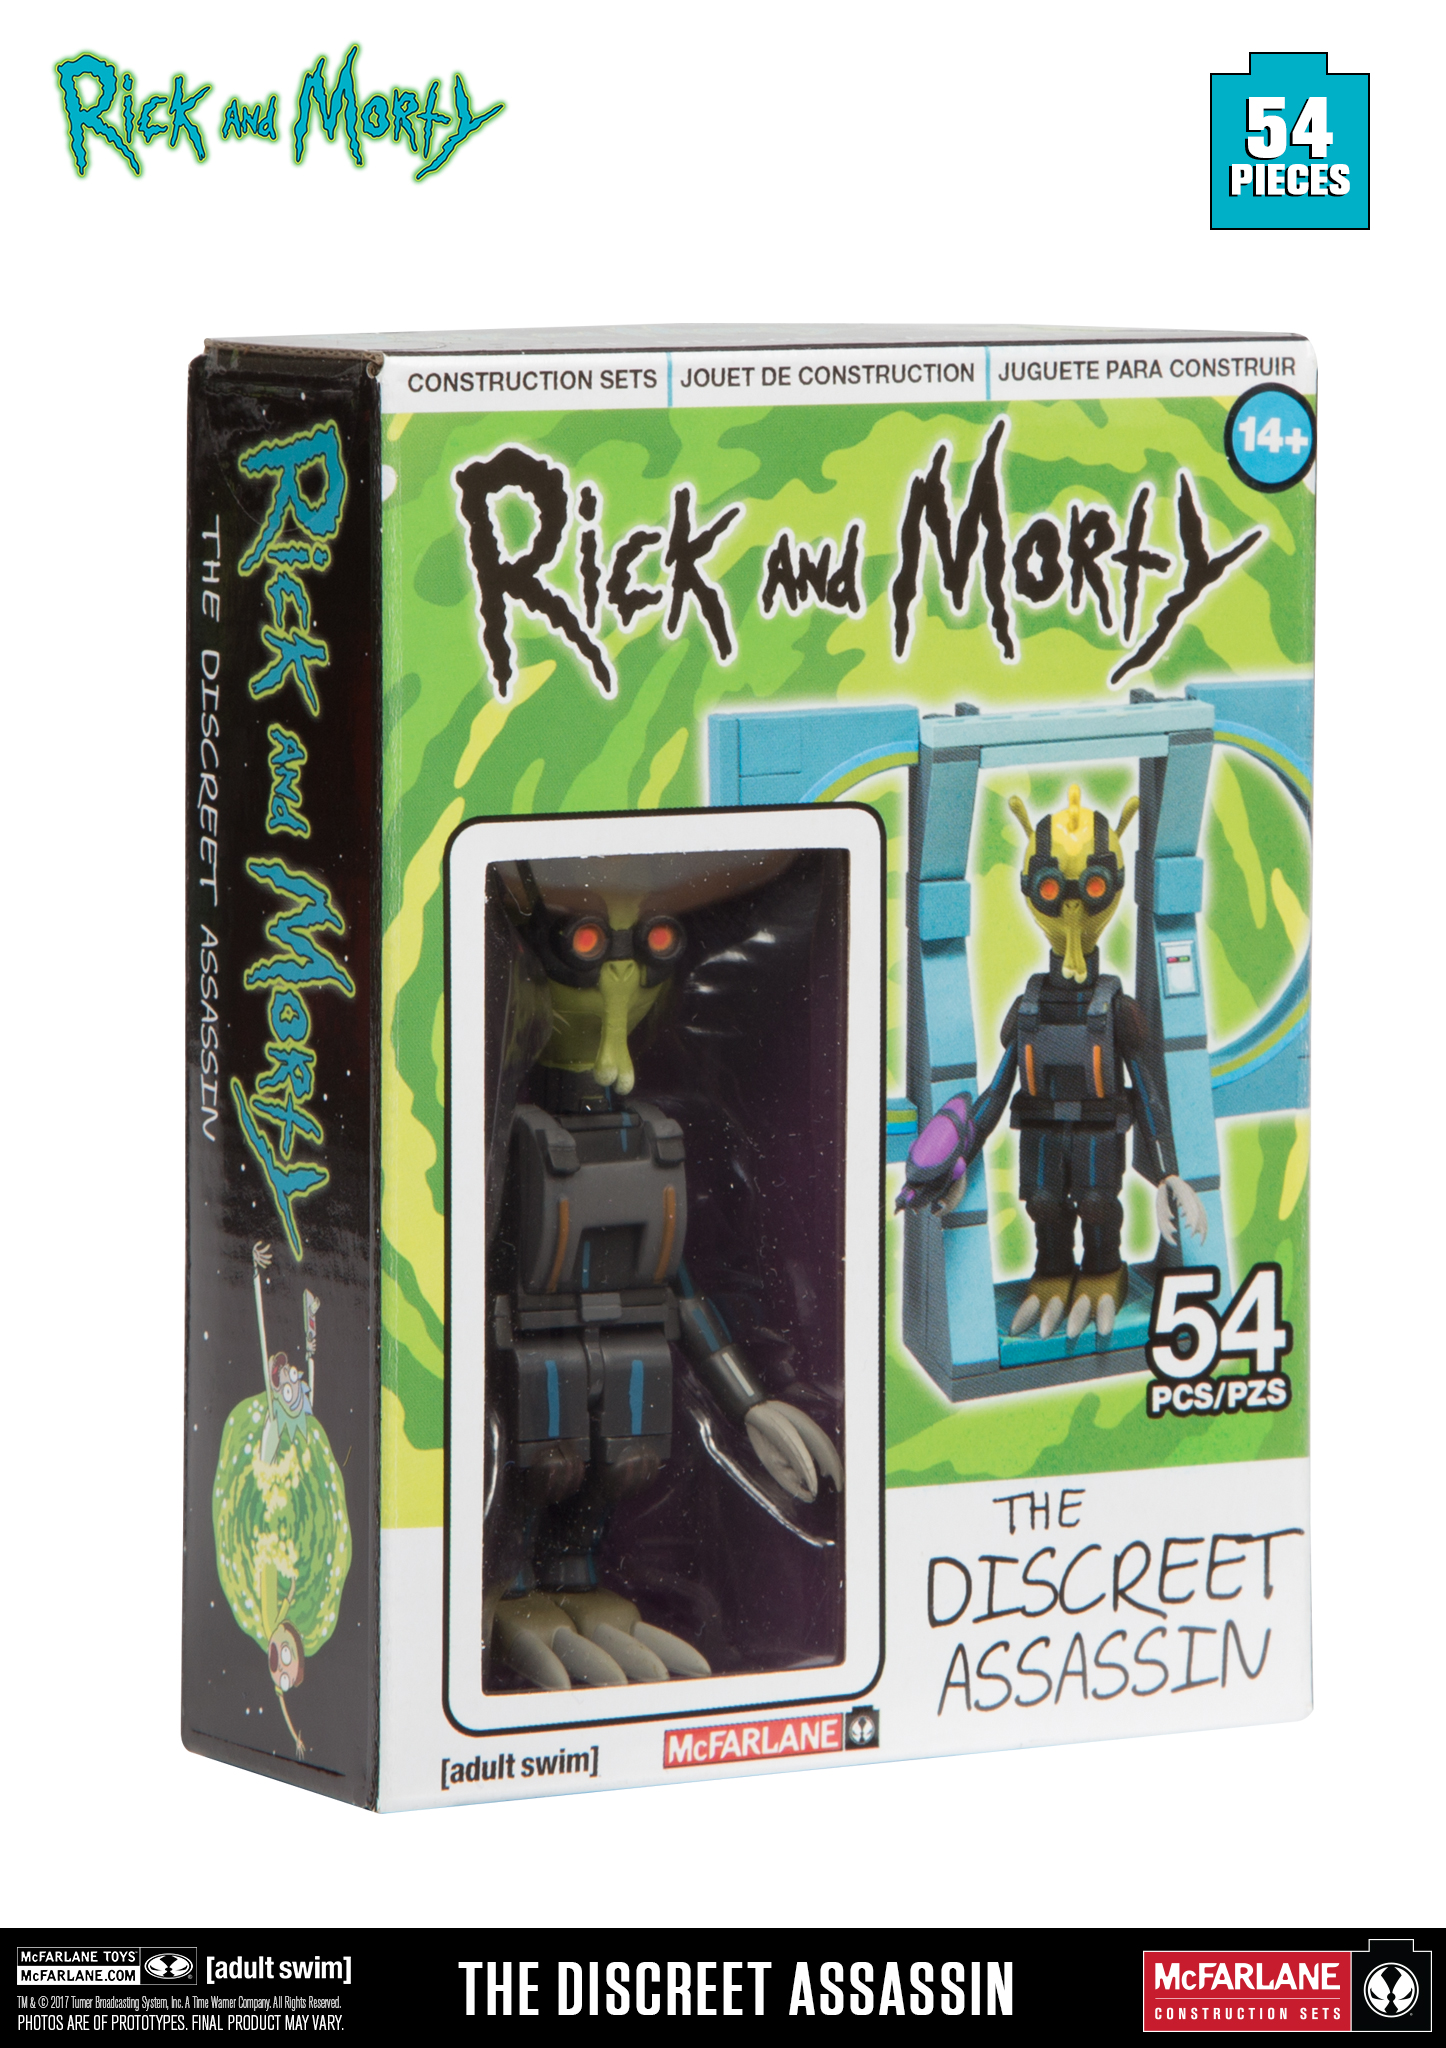 2016 McFarlane Toys Rick and Morty Building Set Discreet Assassin 54pcs for sale online 